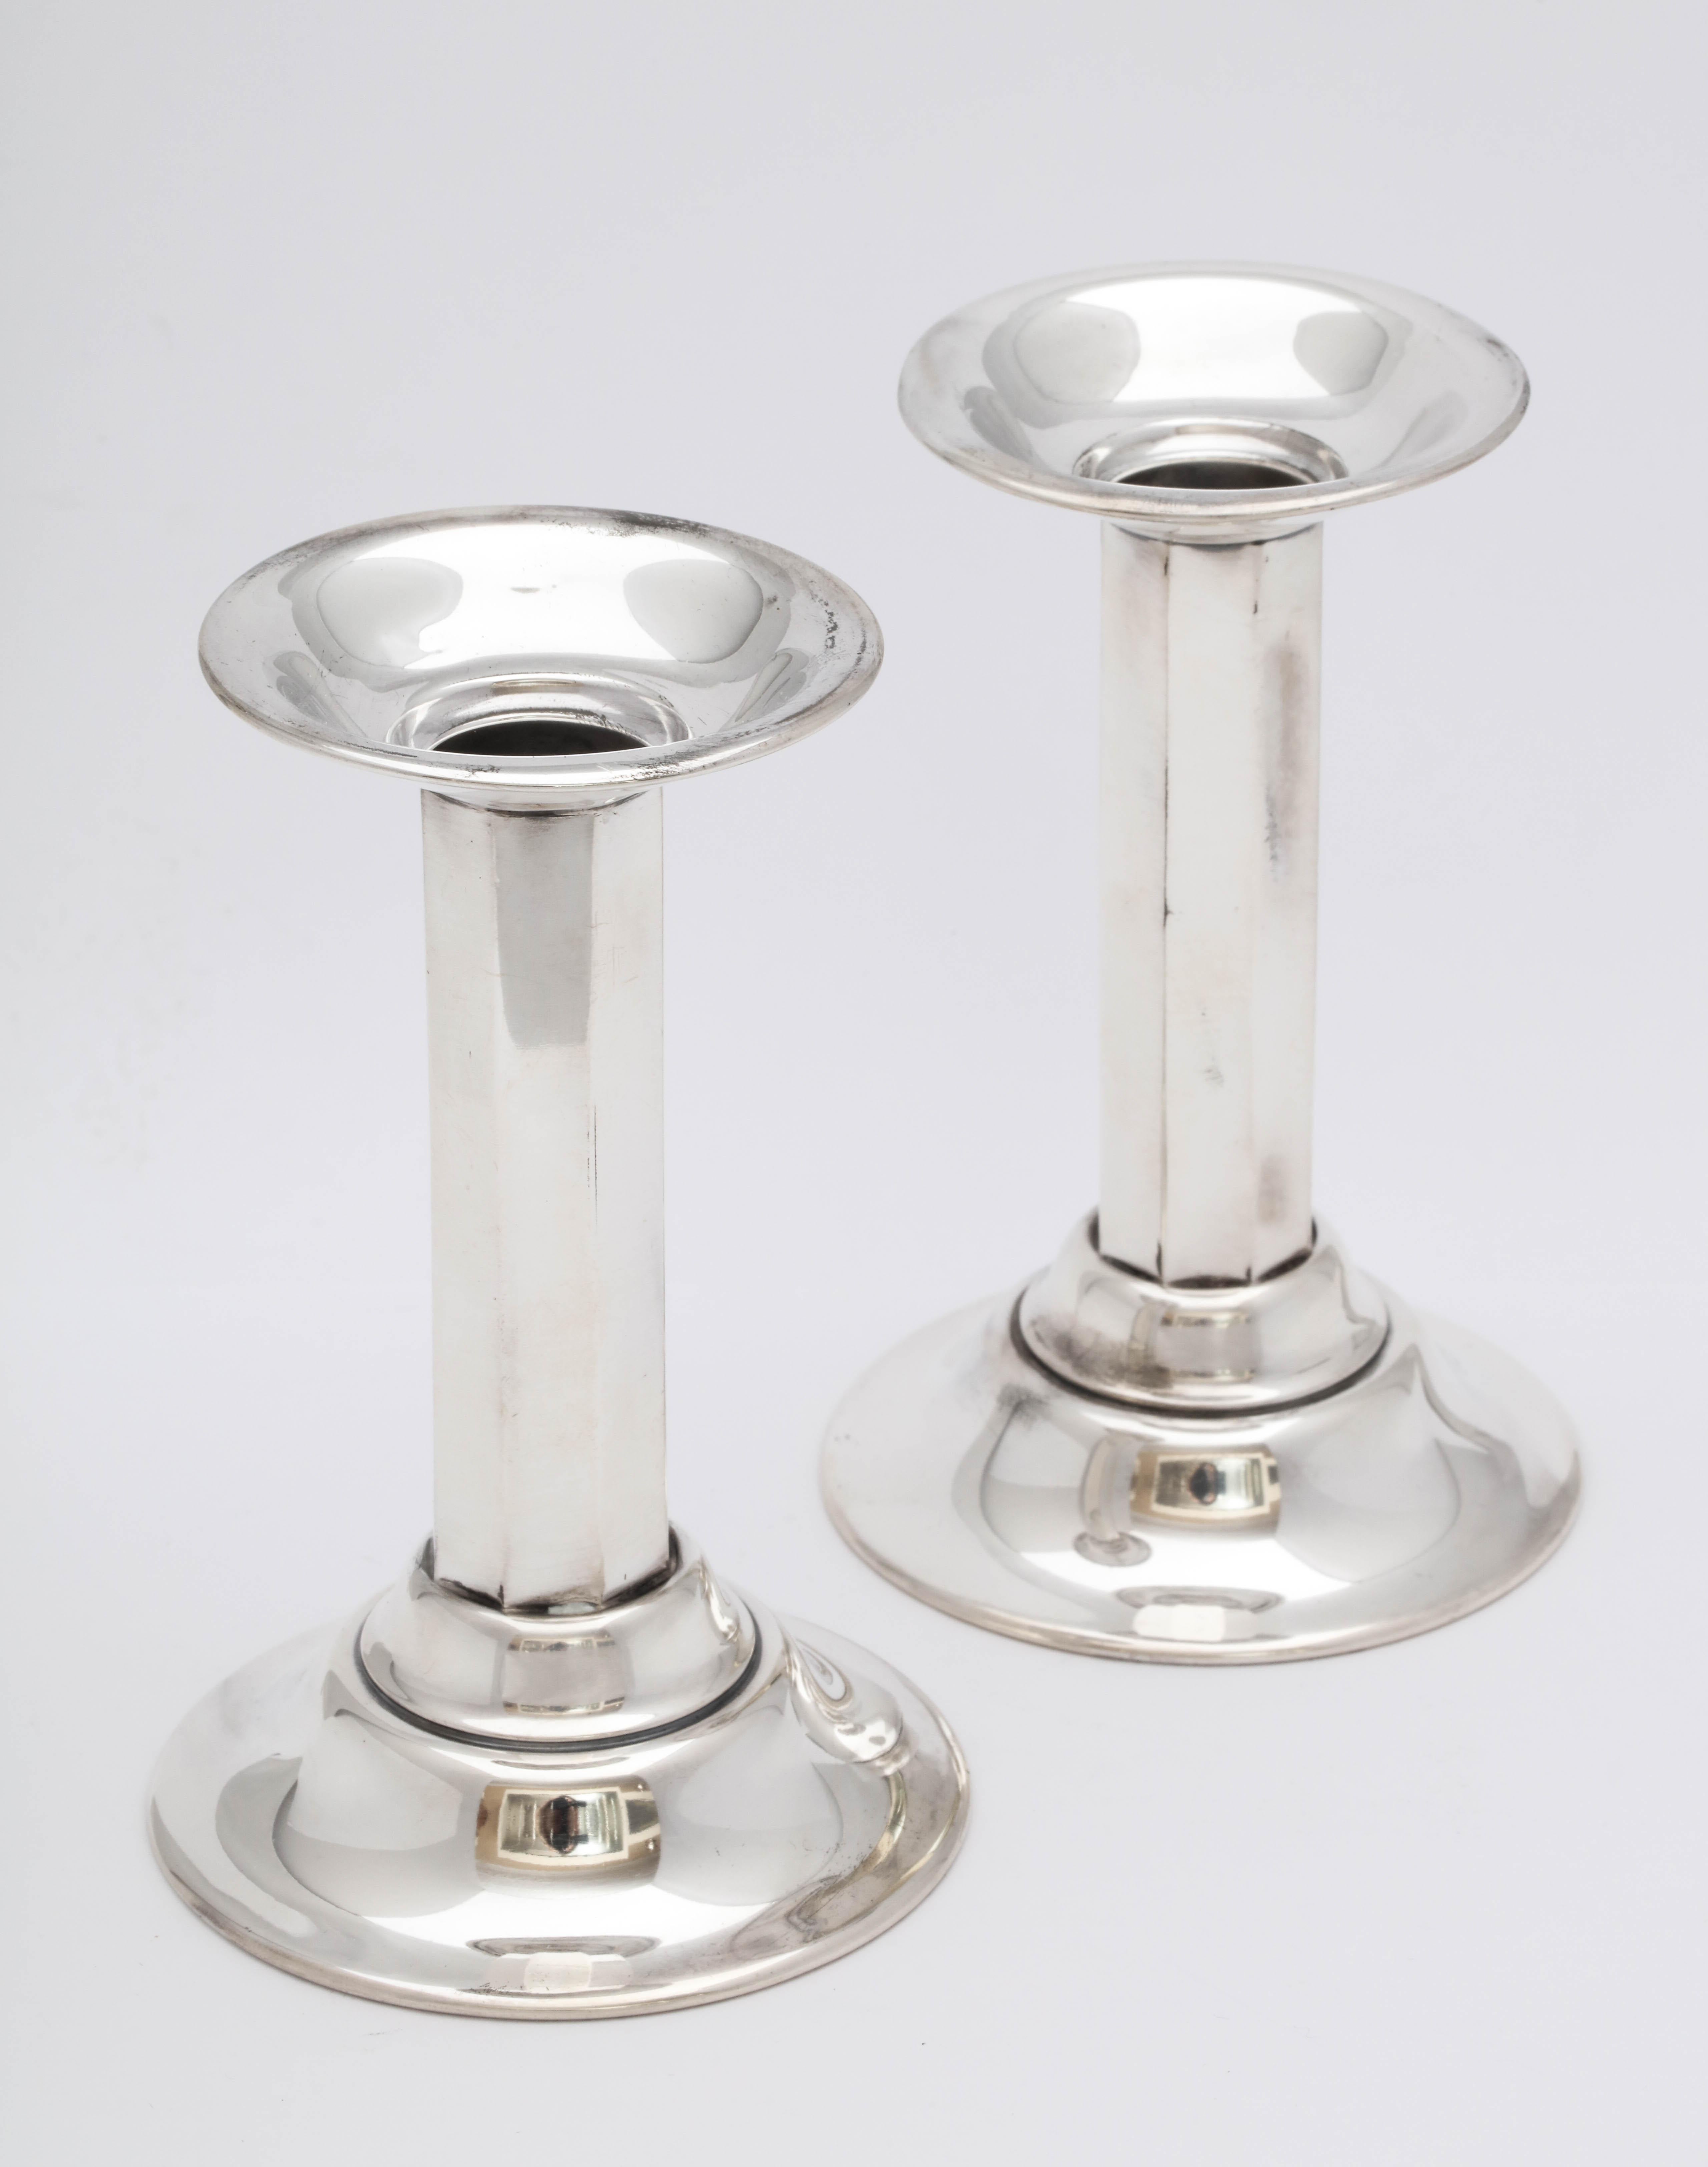 American Pair of Neoclassical-Style Sterling Silver Column Candlesticks- Whiting Mfg. Co.